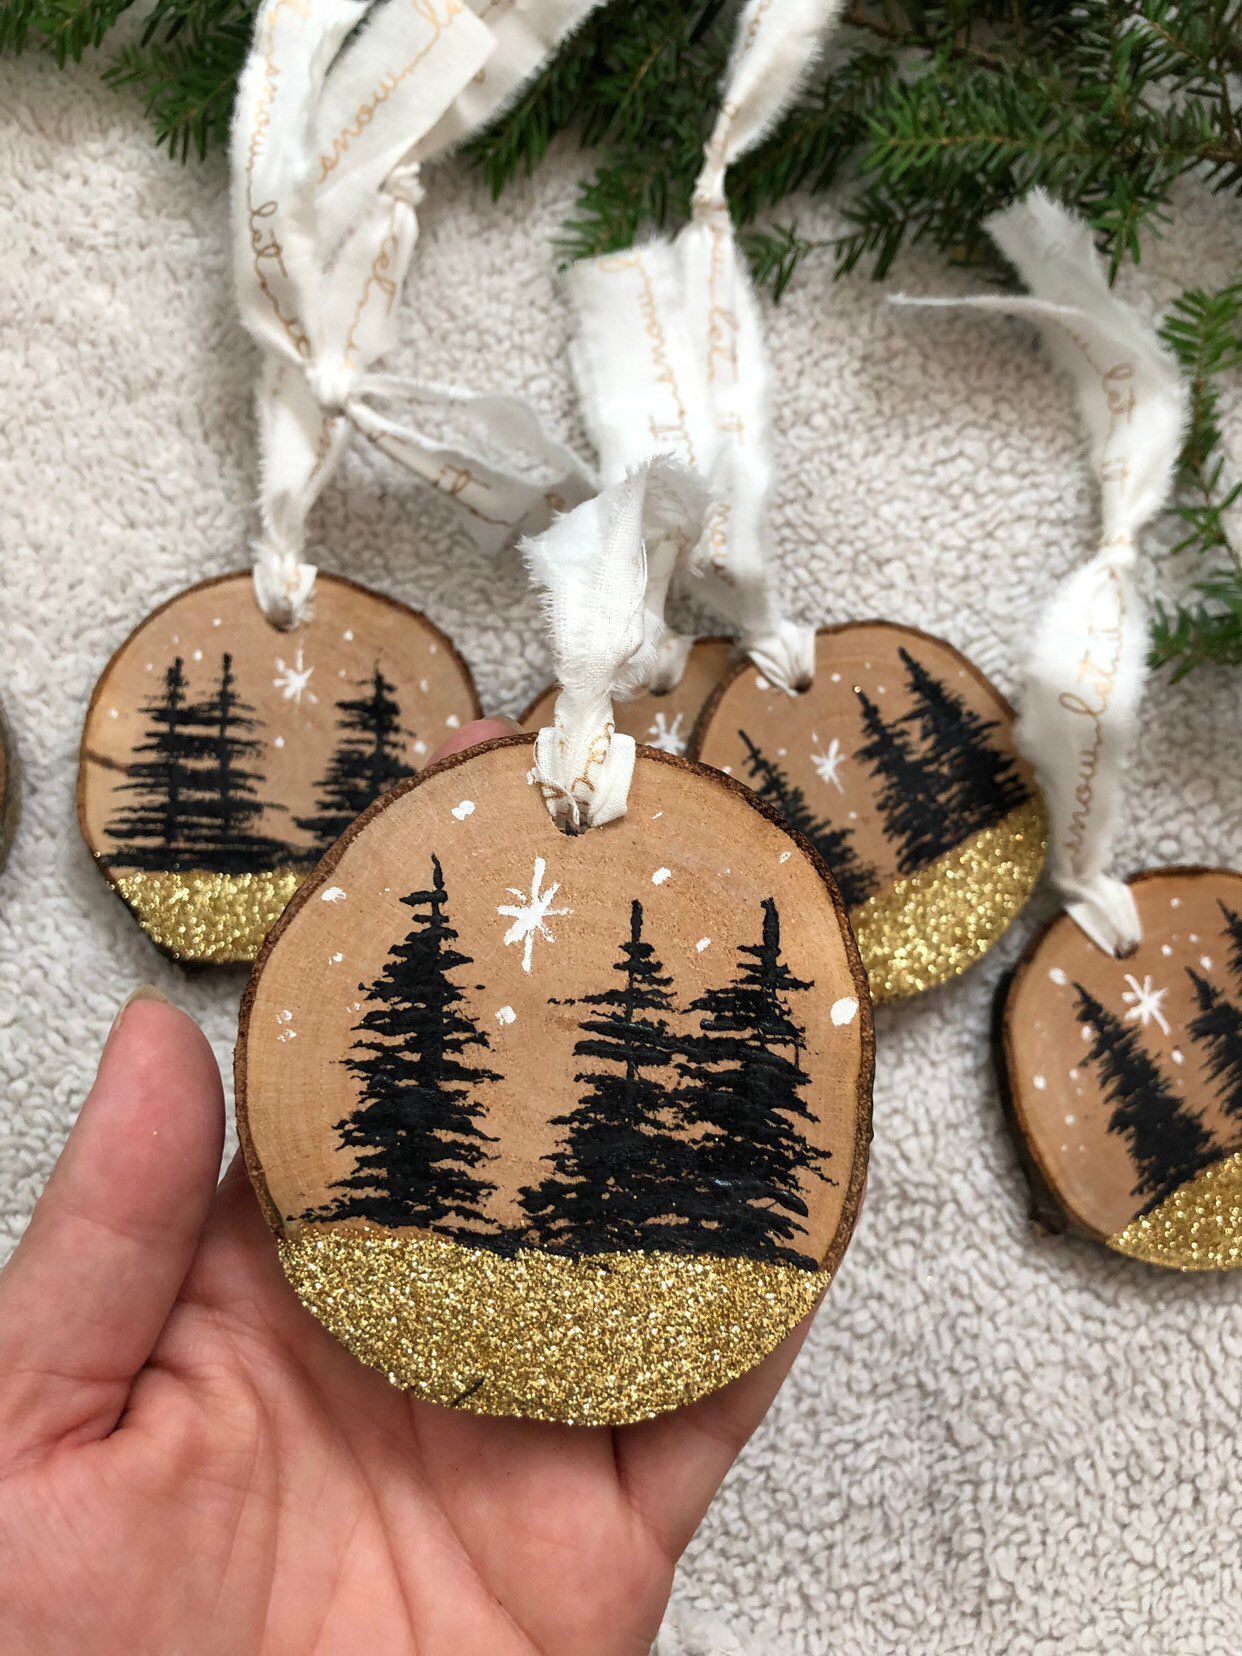 North star and trees, with gold glitter and let it snow ribbon- modern cabin Christmas, nordic decor,hand painted Christmas ornaments - North star and trees, with gold glitter and let it snow ribbon- modern cabin Christmas, nordic decor,hand painted Christmas ornaments -   18 diy Christmas ornaments ideas